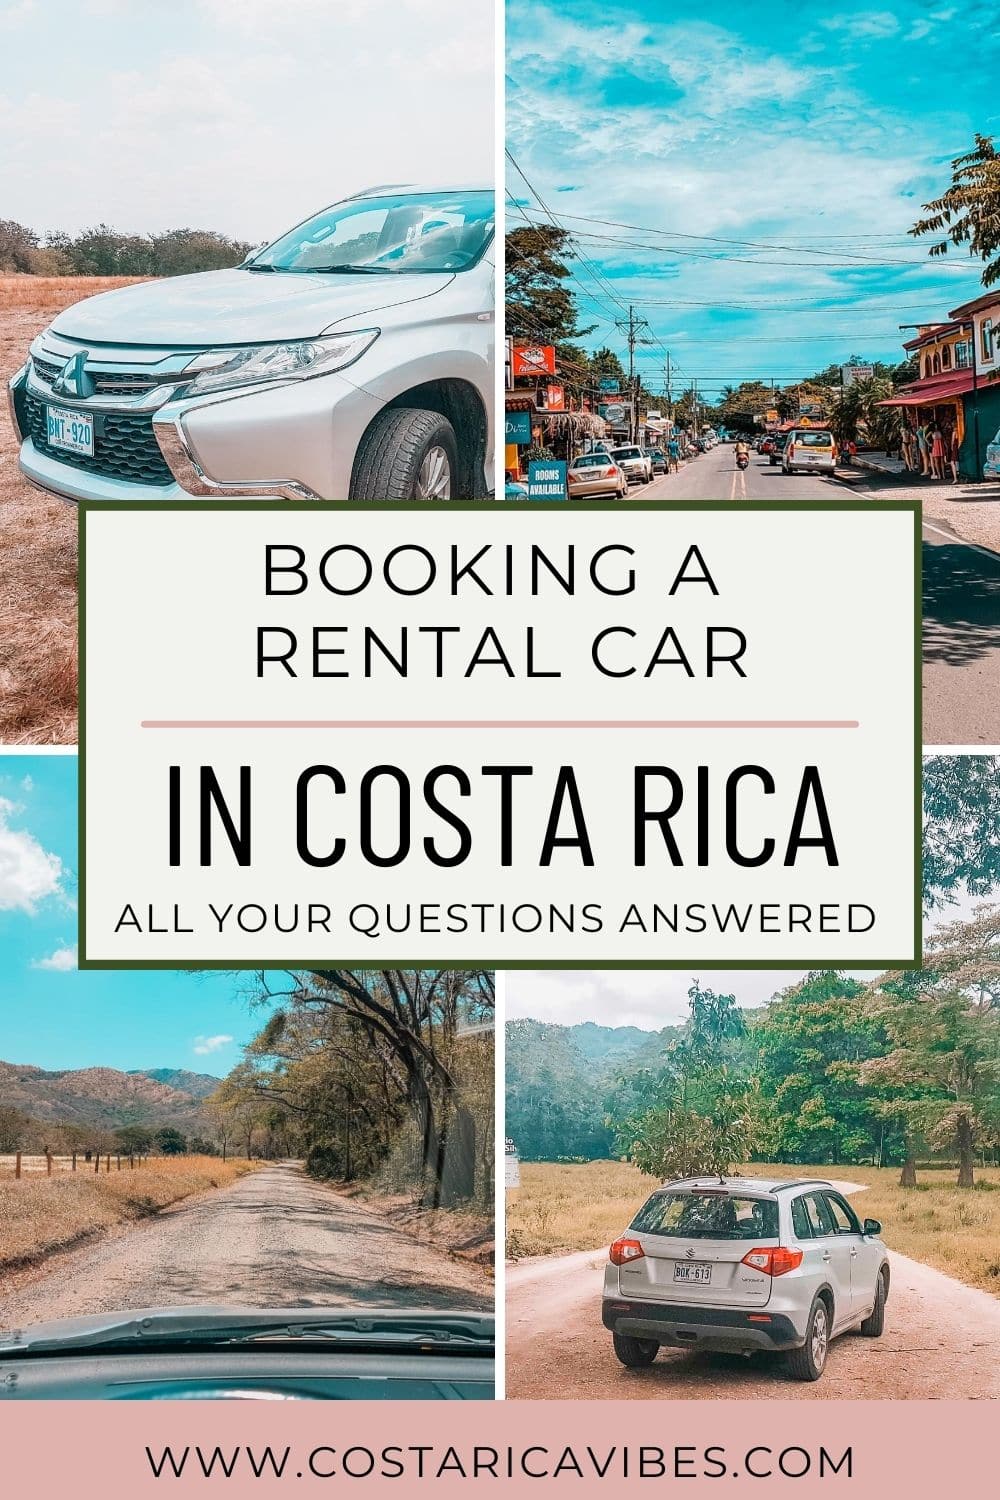 Costa Rica Car Rental: All Your Questions Answered